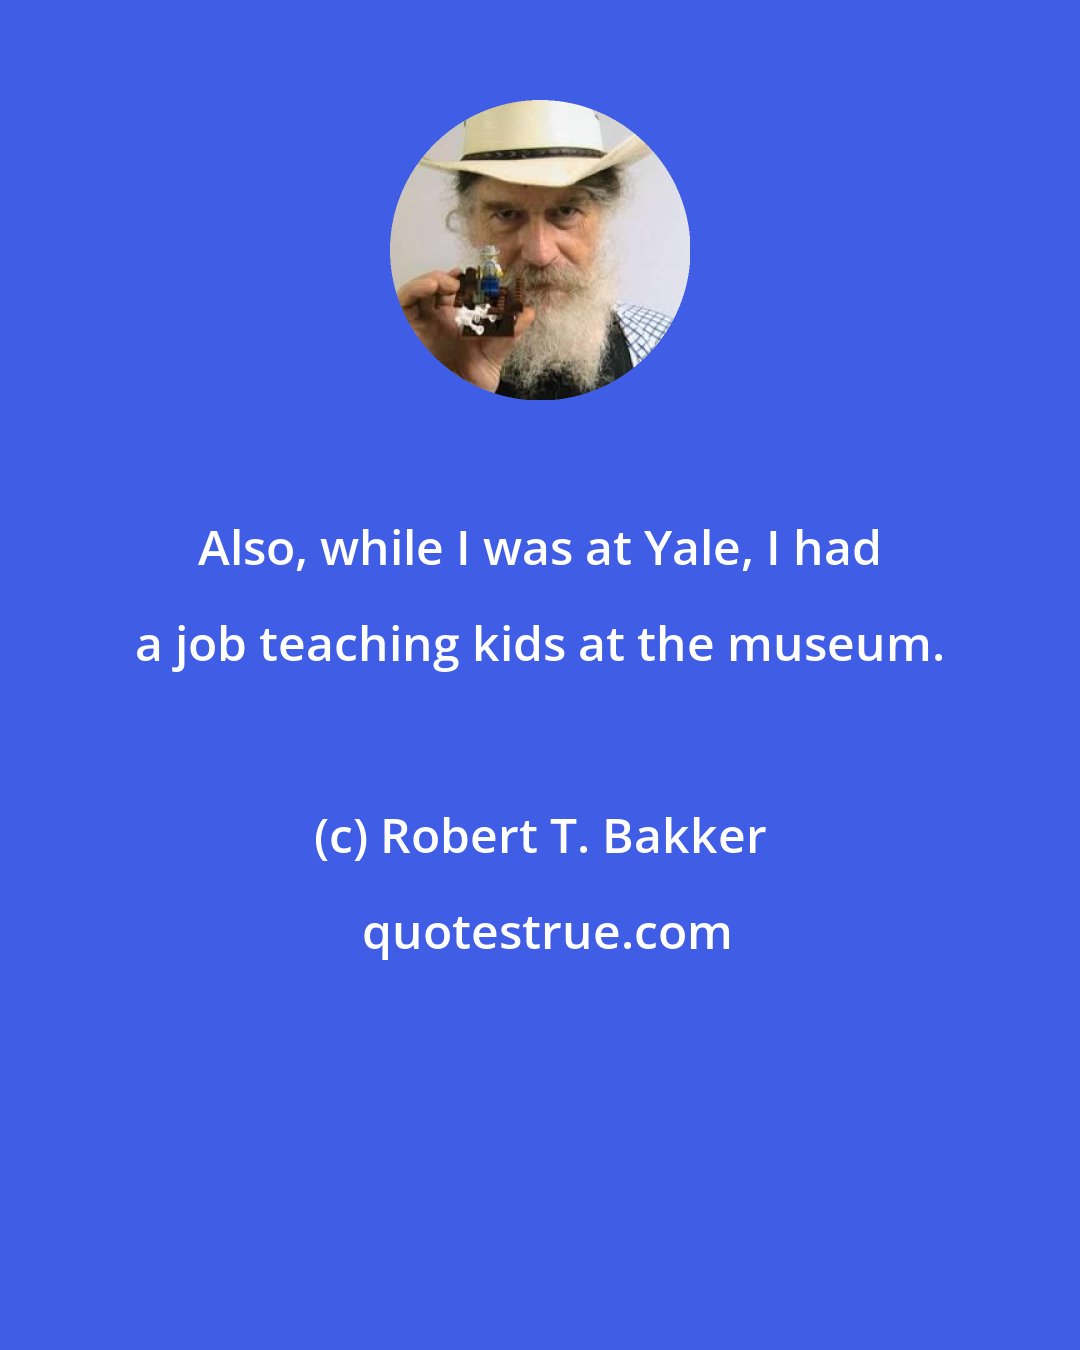 Robert T. Bakker: Also, while I was at Yale, I had a job teaching kids at the museum.